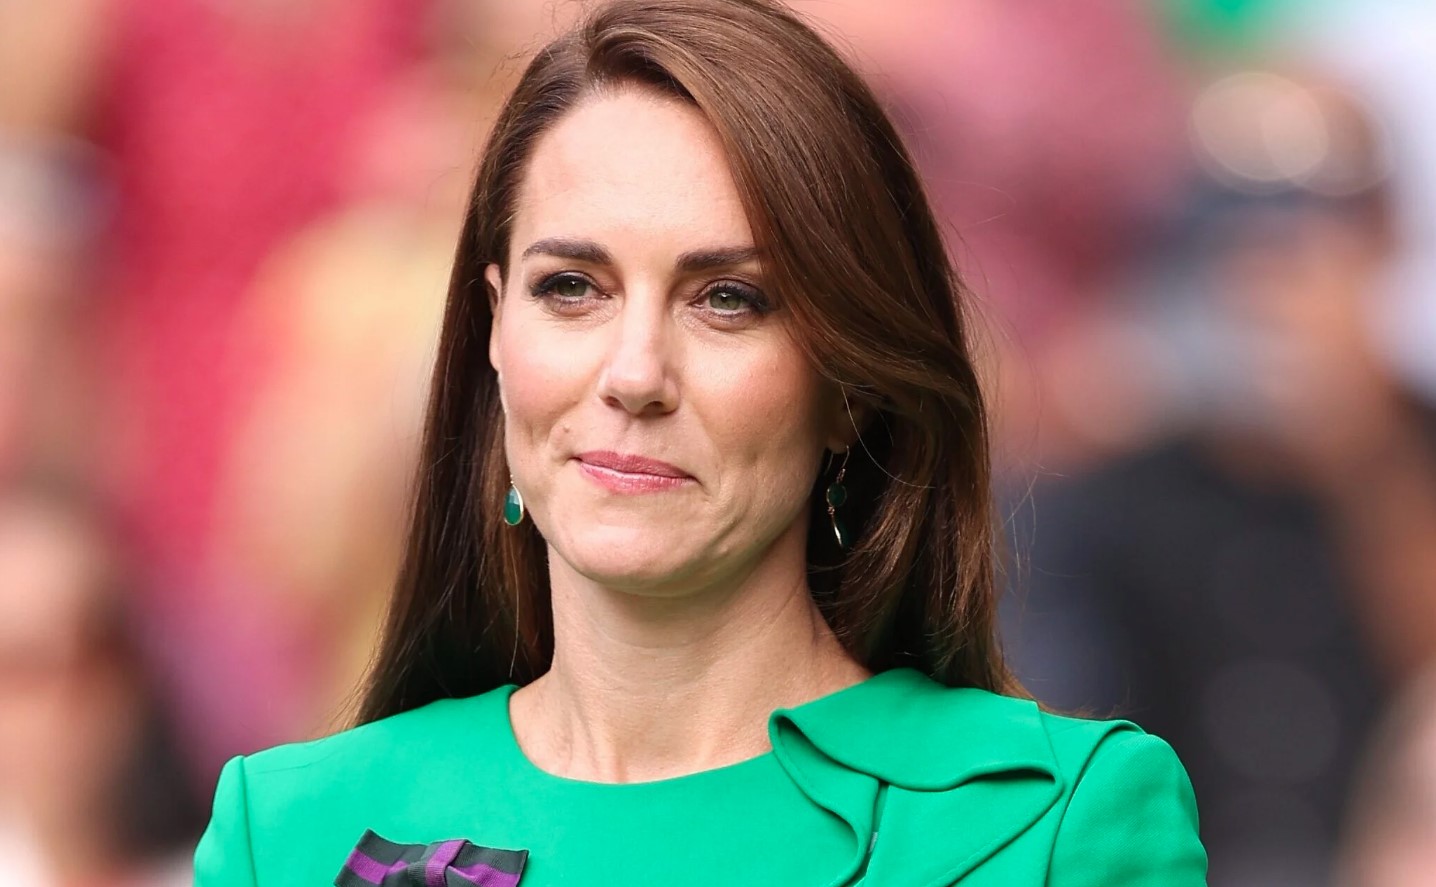 ENGLAND: Kate Middleton, Princess of Wales, remains in hospital;  Rumors spread about his health